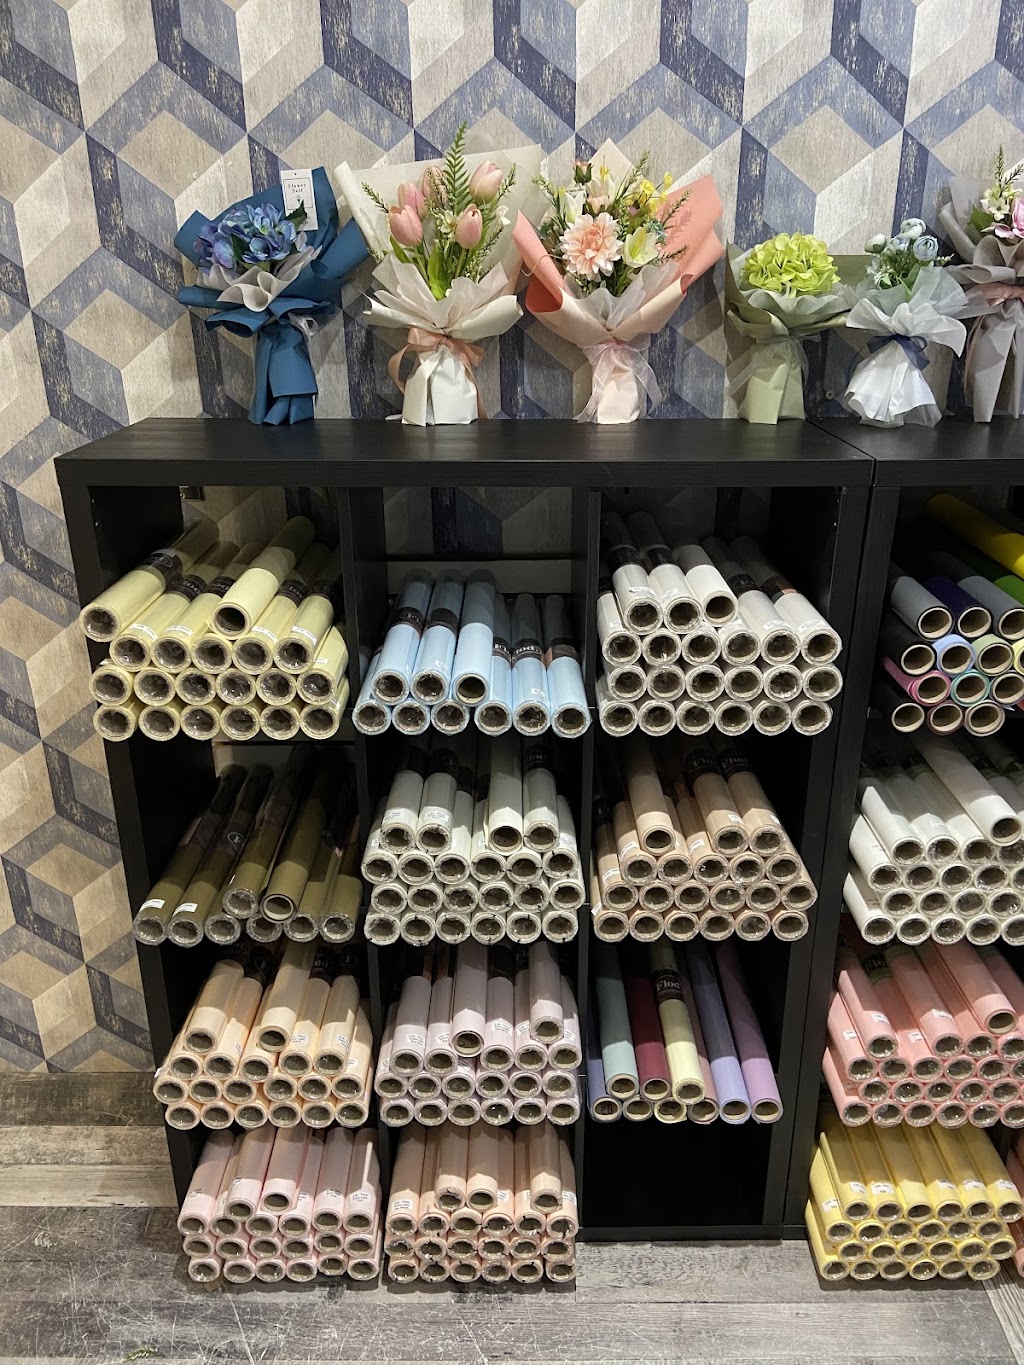 Korean Wrapping Paper | 7181 Yonge St Unit 230, Thornhill, ON L3T 0C7, Canada | Phone: (647) 519-5495